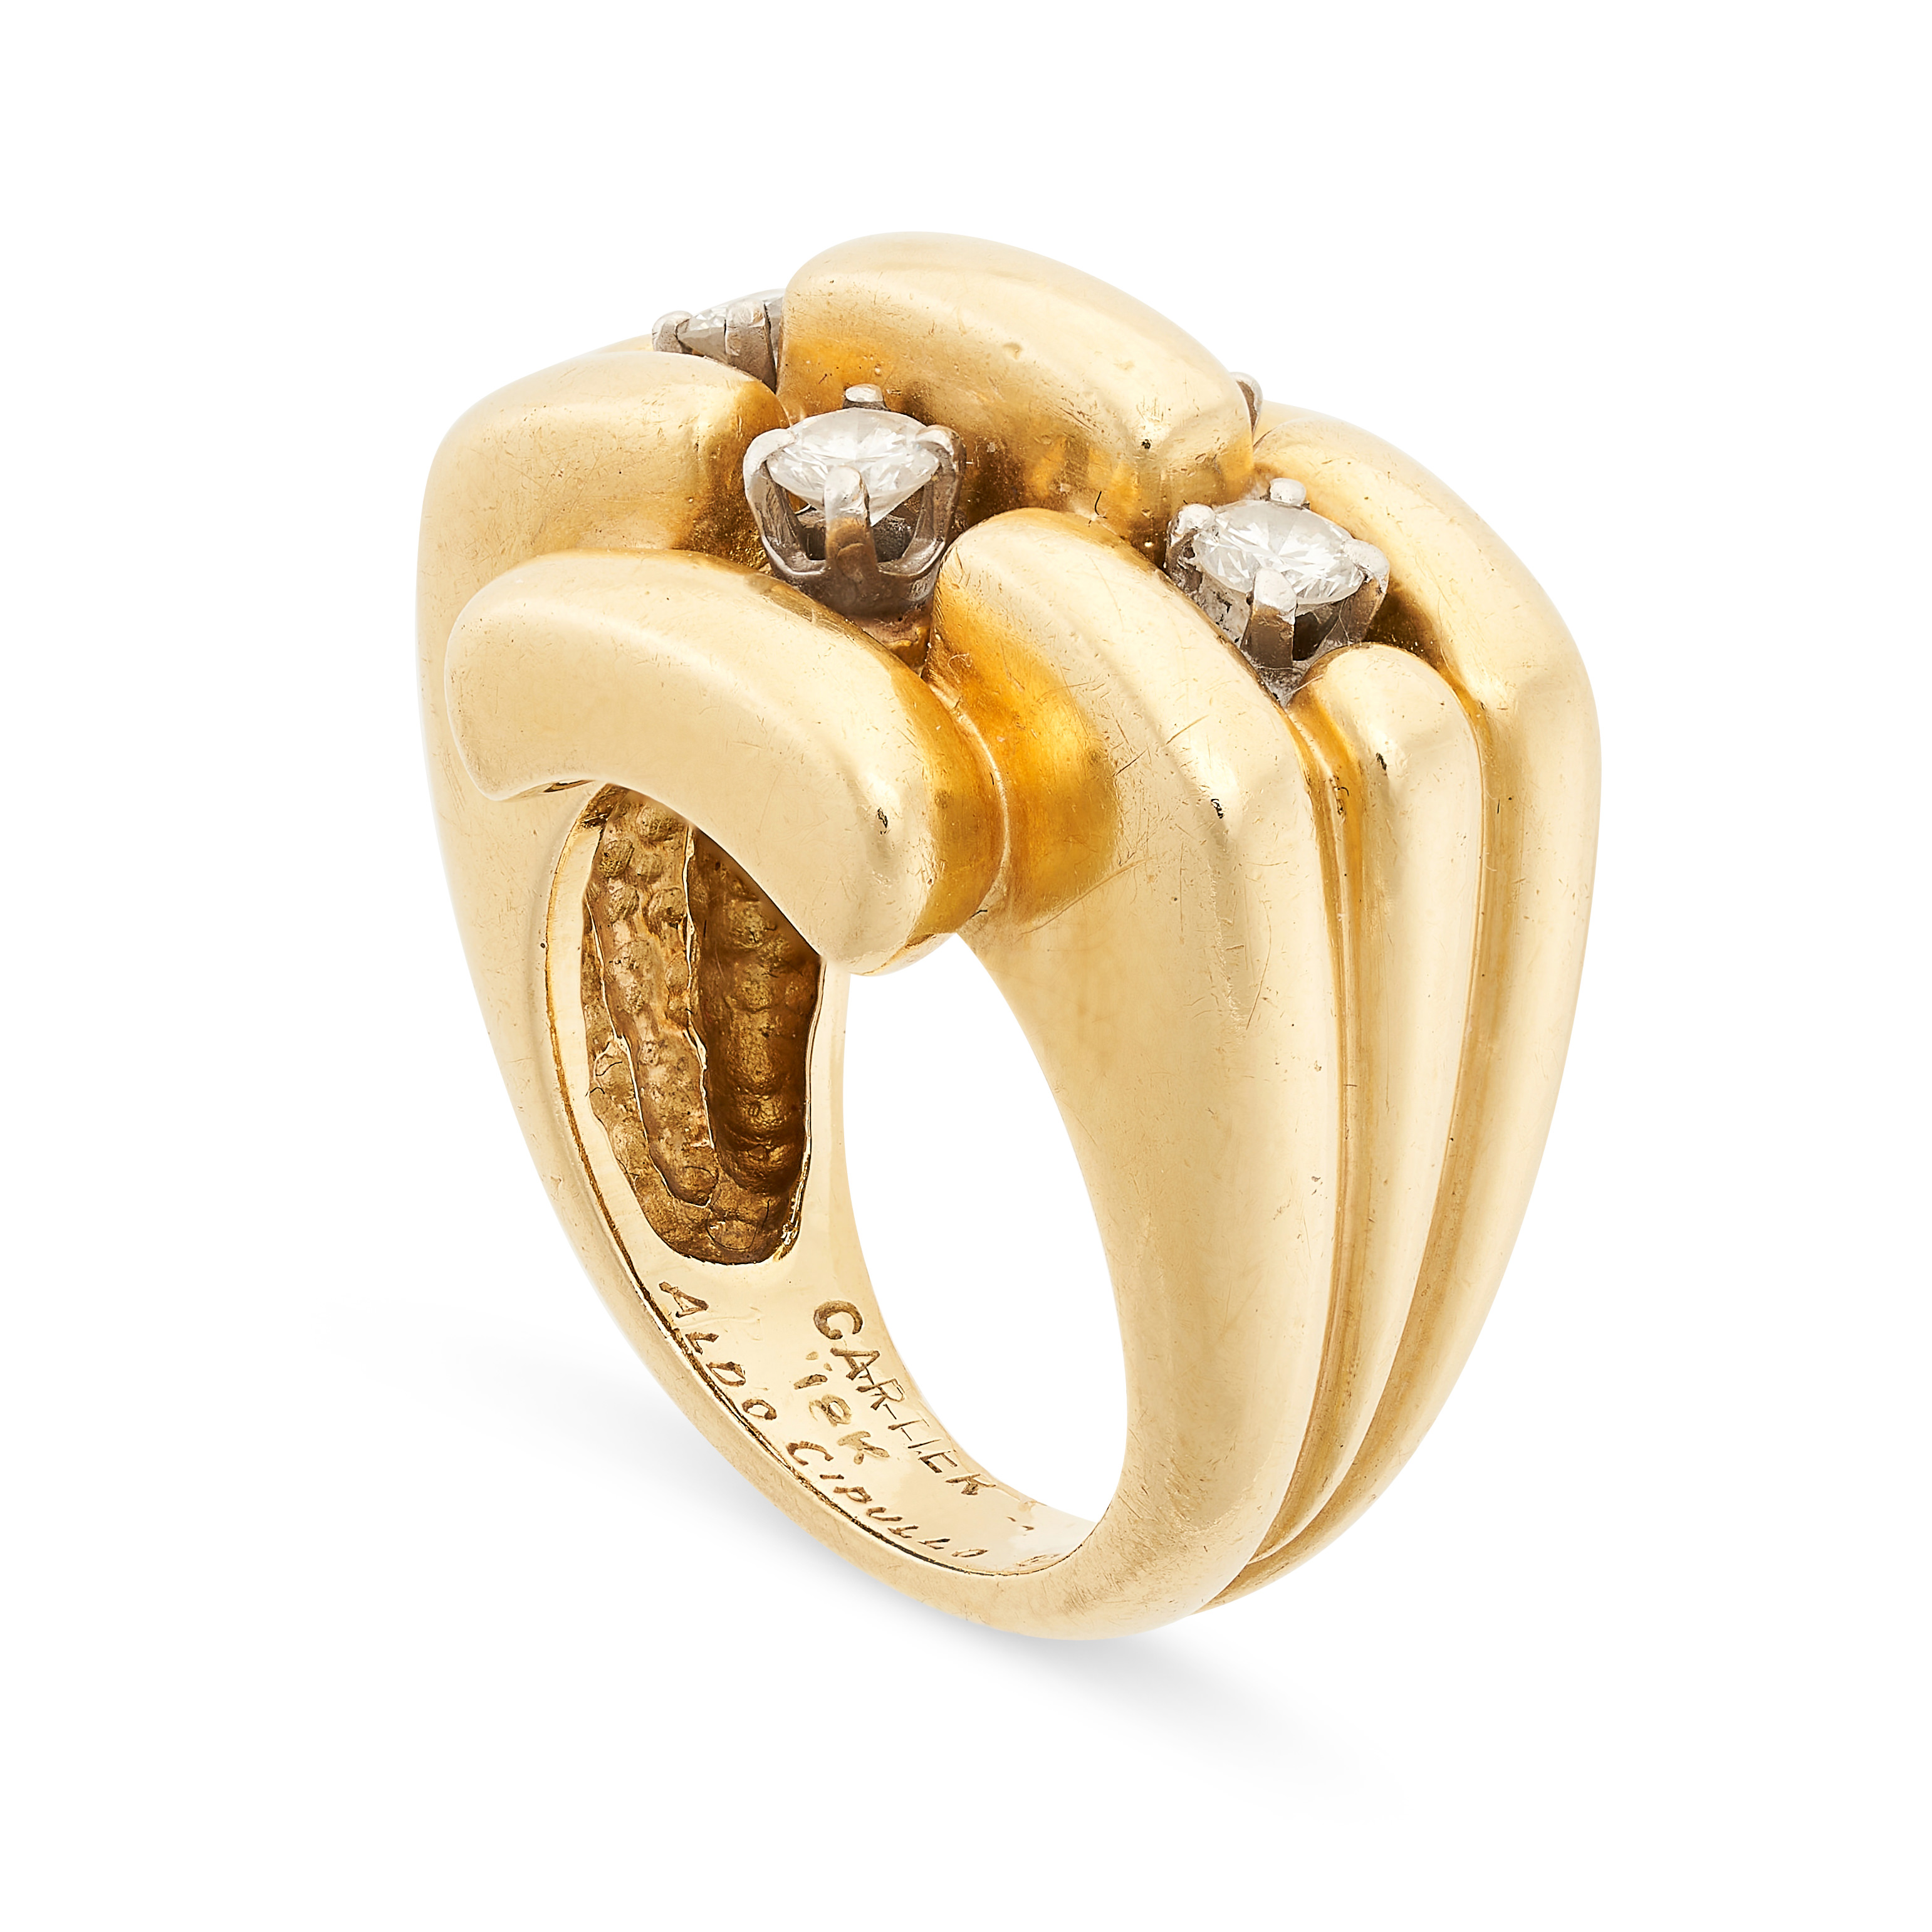 ALDO CIPULLO FOR CARTIER, A VINTAGE DIAMOND DRESS RING, 1971 in 18ct yellow gold, designed as a - Image 2 of 2